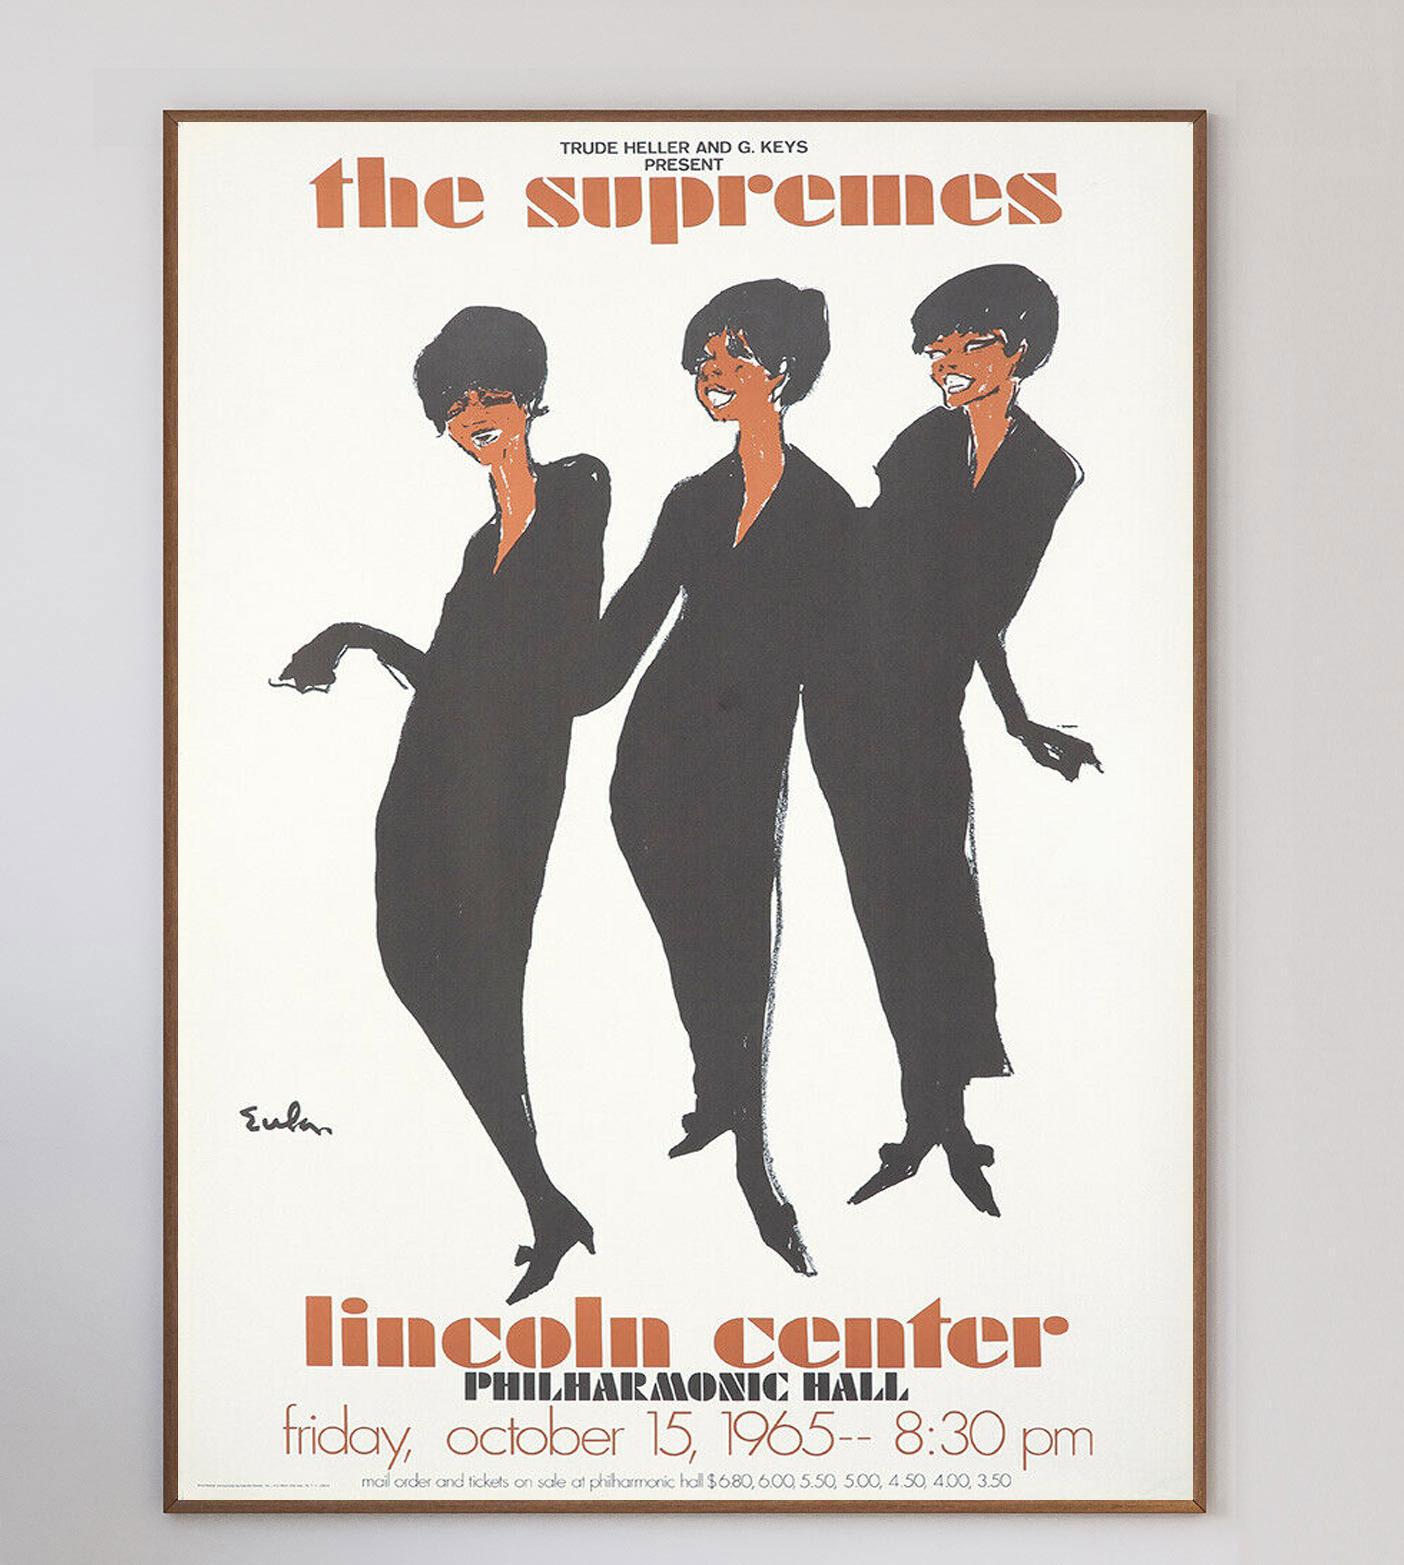 Renowned fashion illustrator Joe Eula was commissioned to design this poster for the sold out show for The Supremes in 1965 at New York's distinguished Philharmonic Hall at the Lincoln Center.

The concert came at the height of the iconic groups